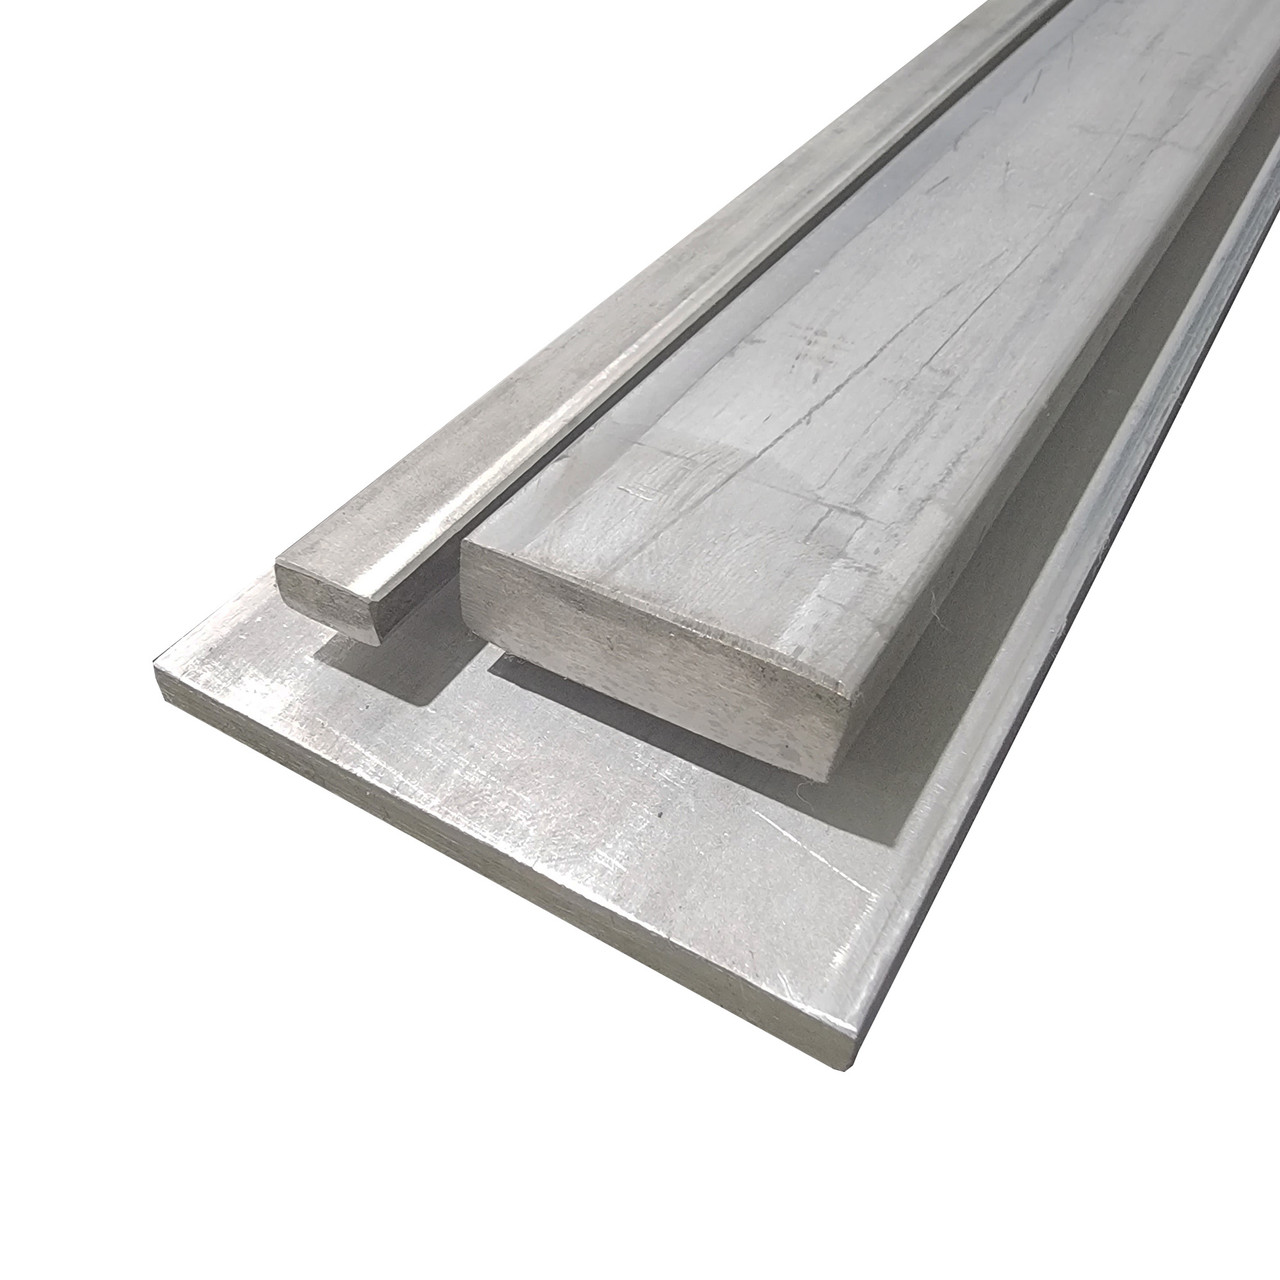 0.250" x 0.500" x 72", 316 Stainless Steel Plate Flat Bar, Hot Rolled